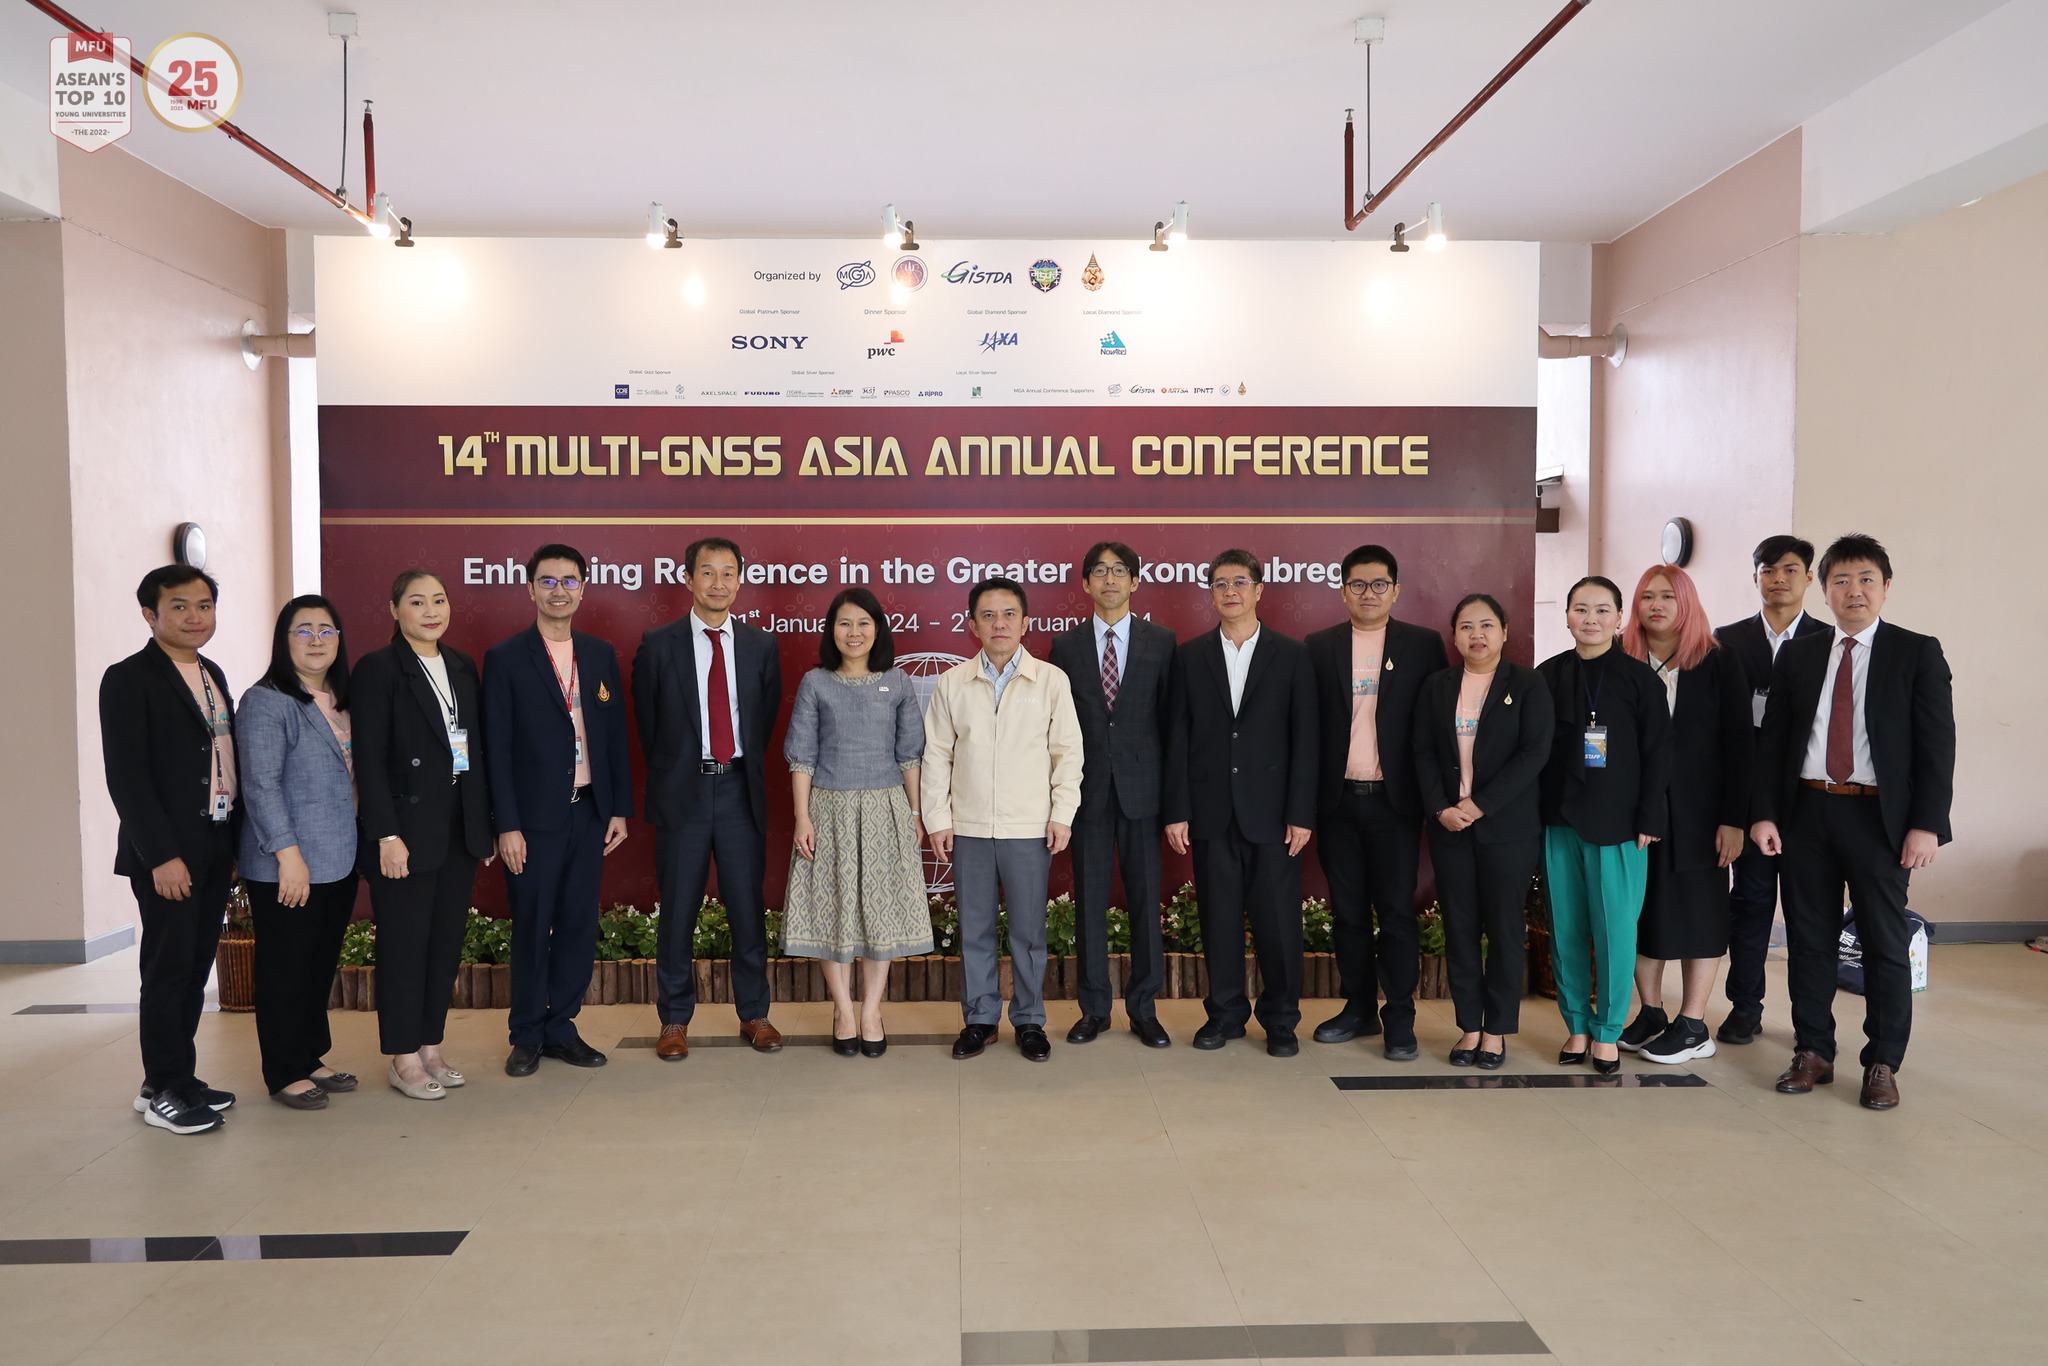 The 14th Multi-GNSS Asia Annual Conference